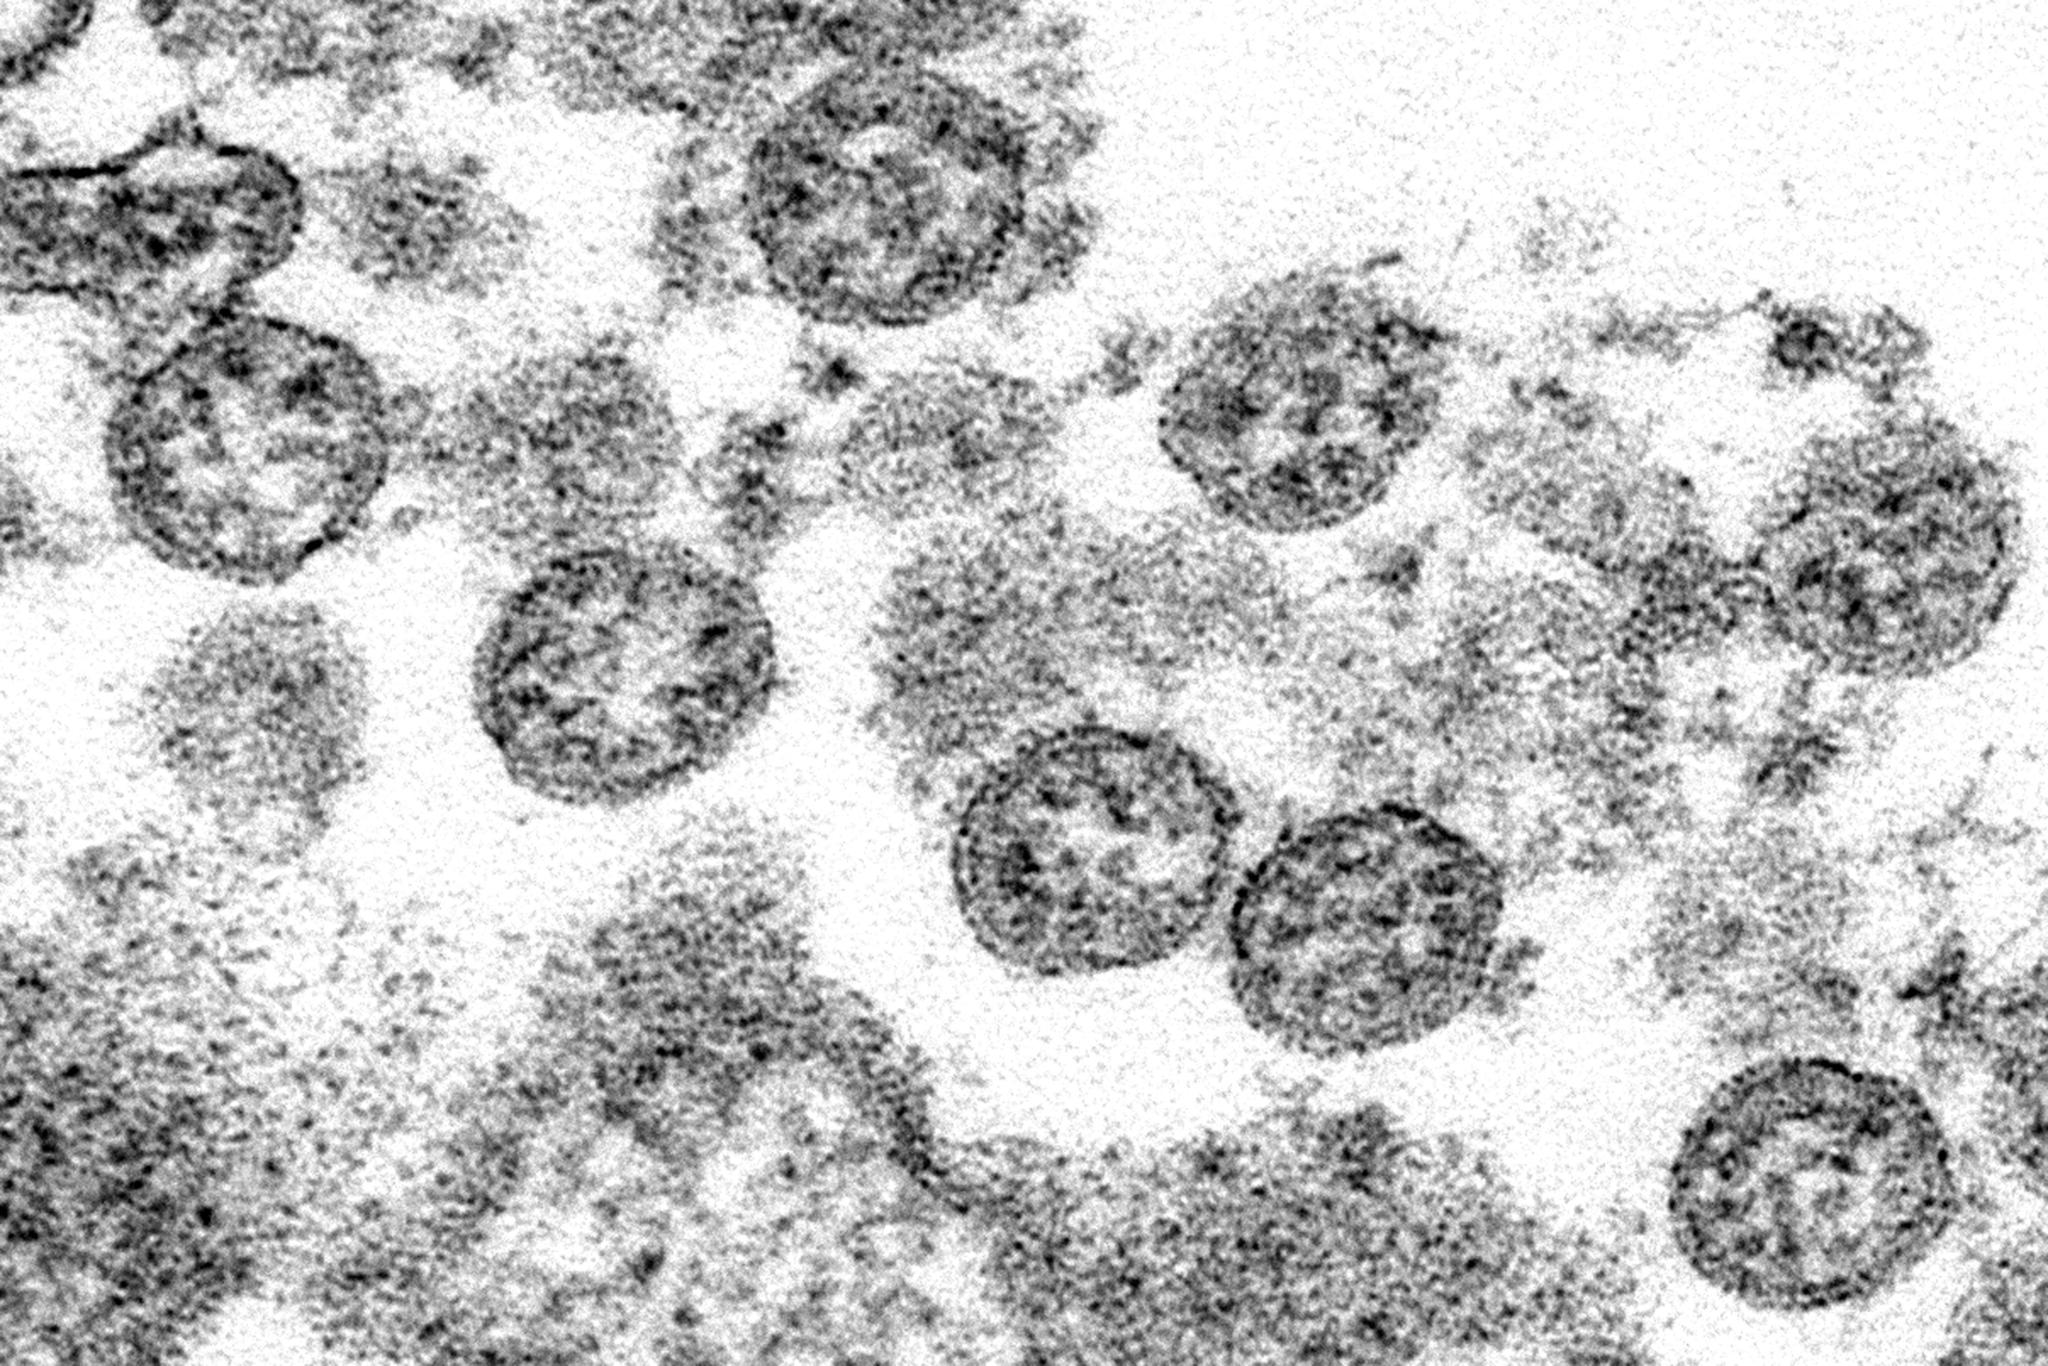 Image of spherical coronavirus particles from the first U.S. case of COVID-19